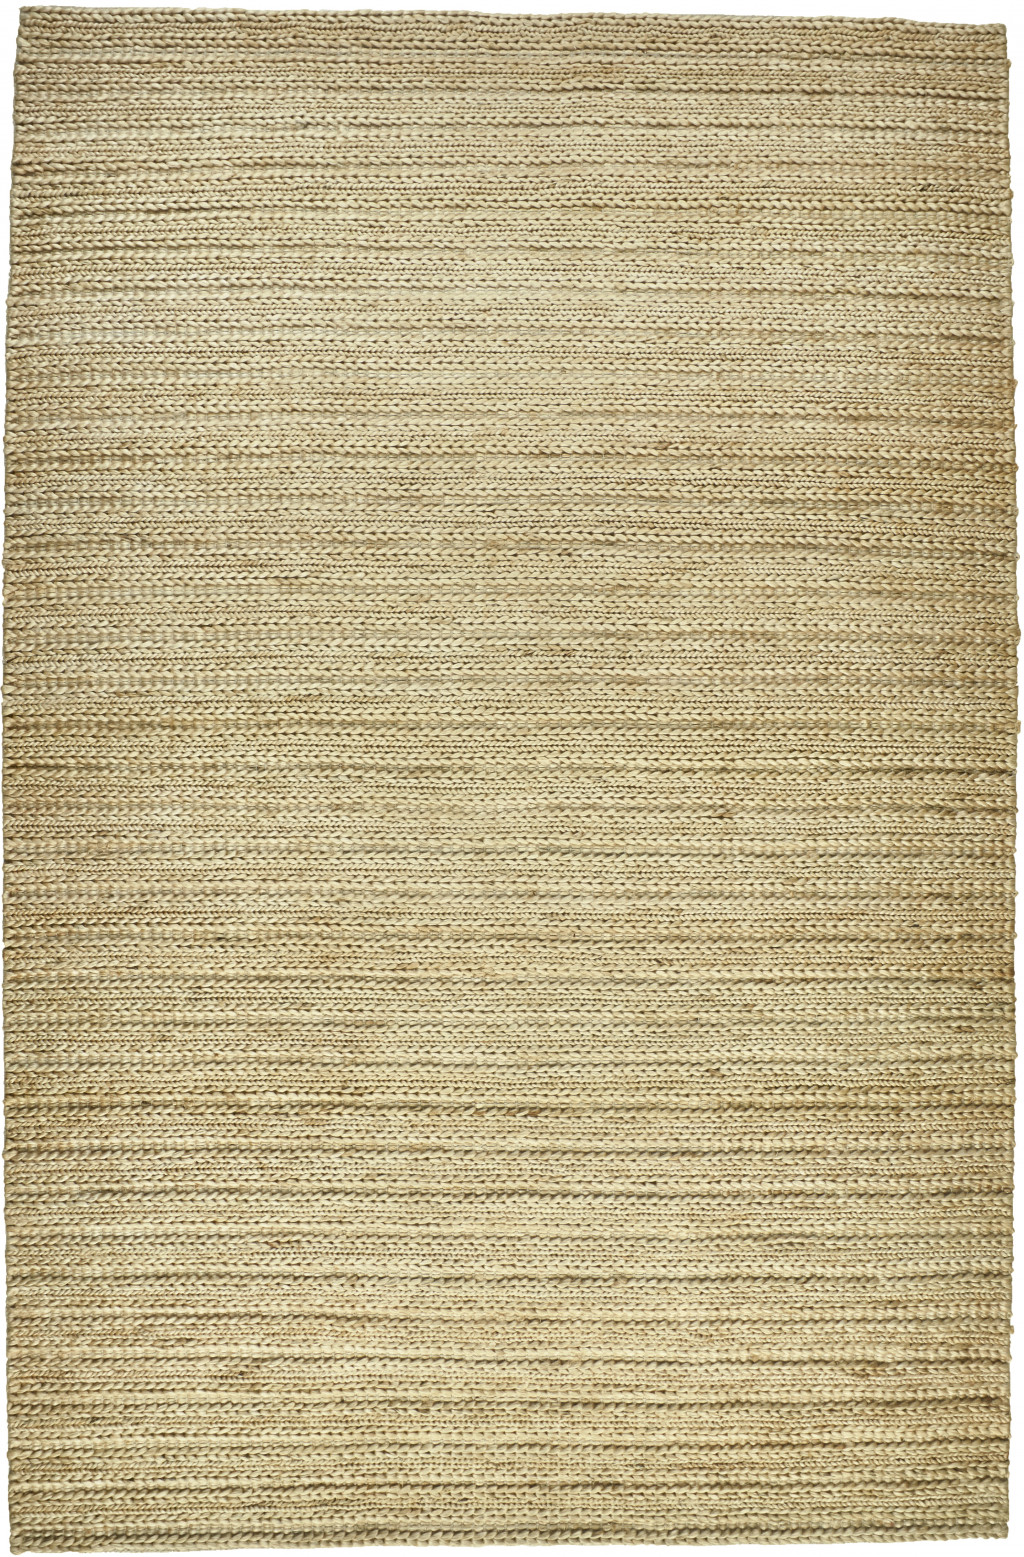 10' X 13' Tan Ivory And Taupe Hand Woven Area Rug-511423-1